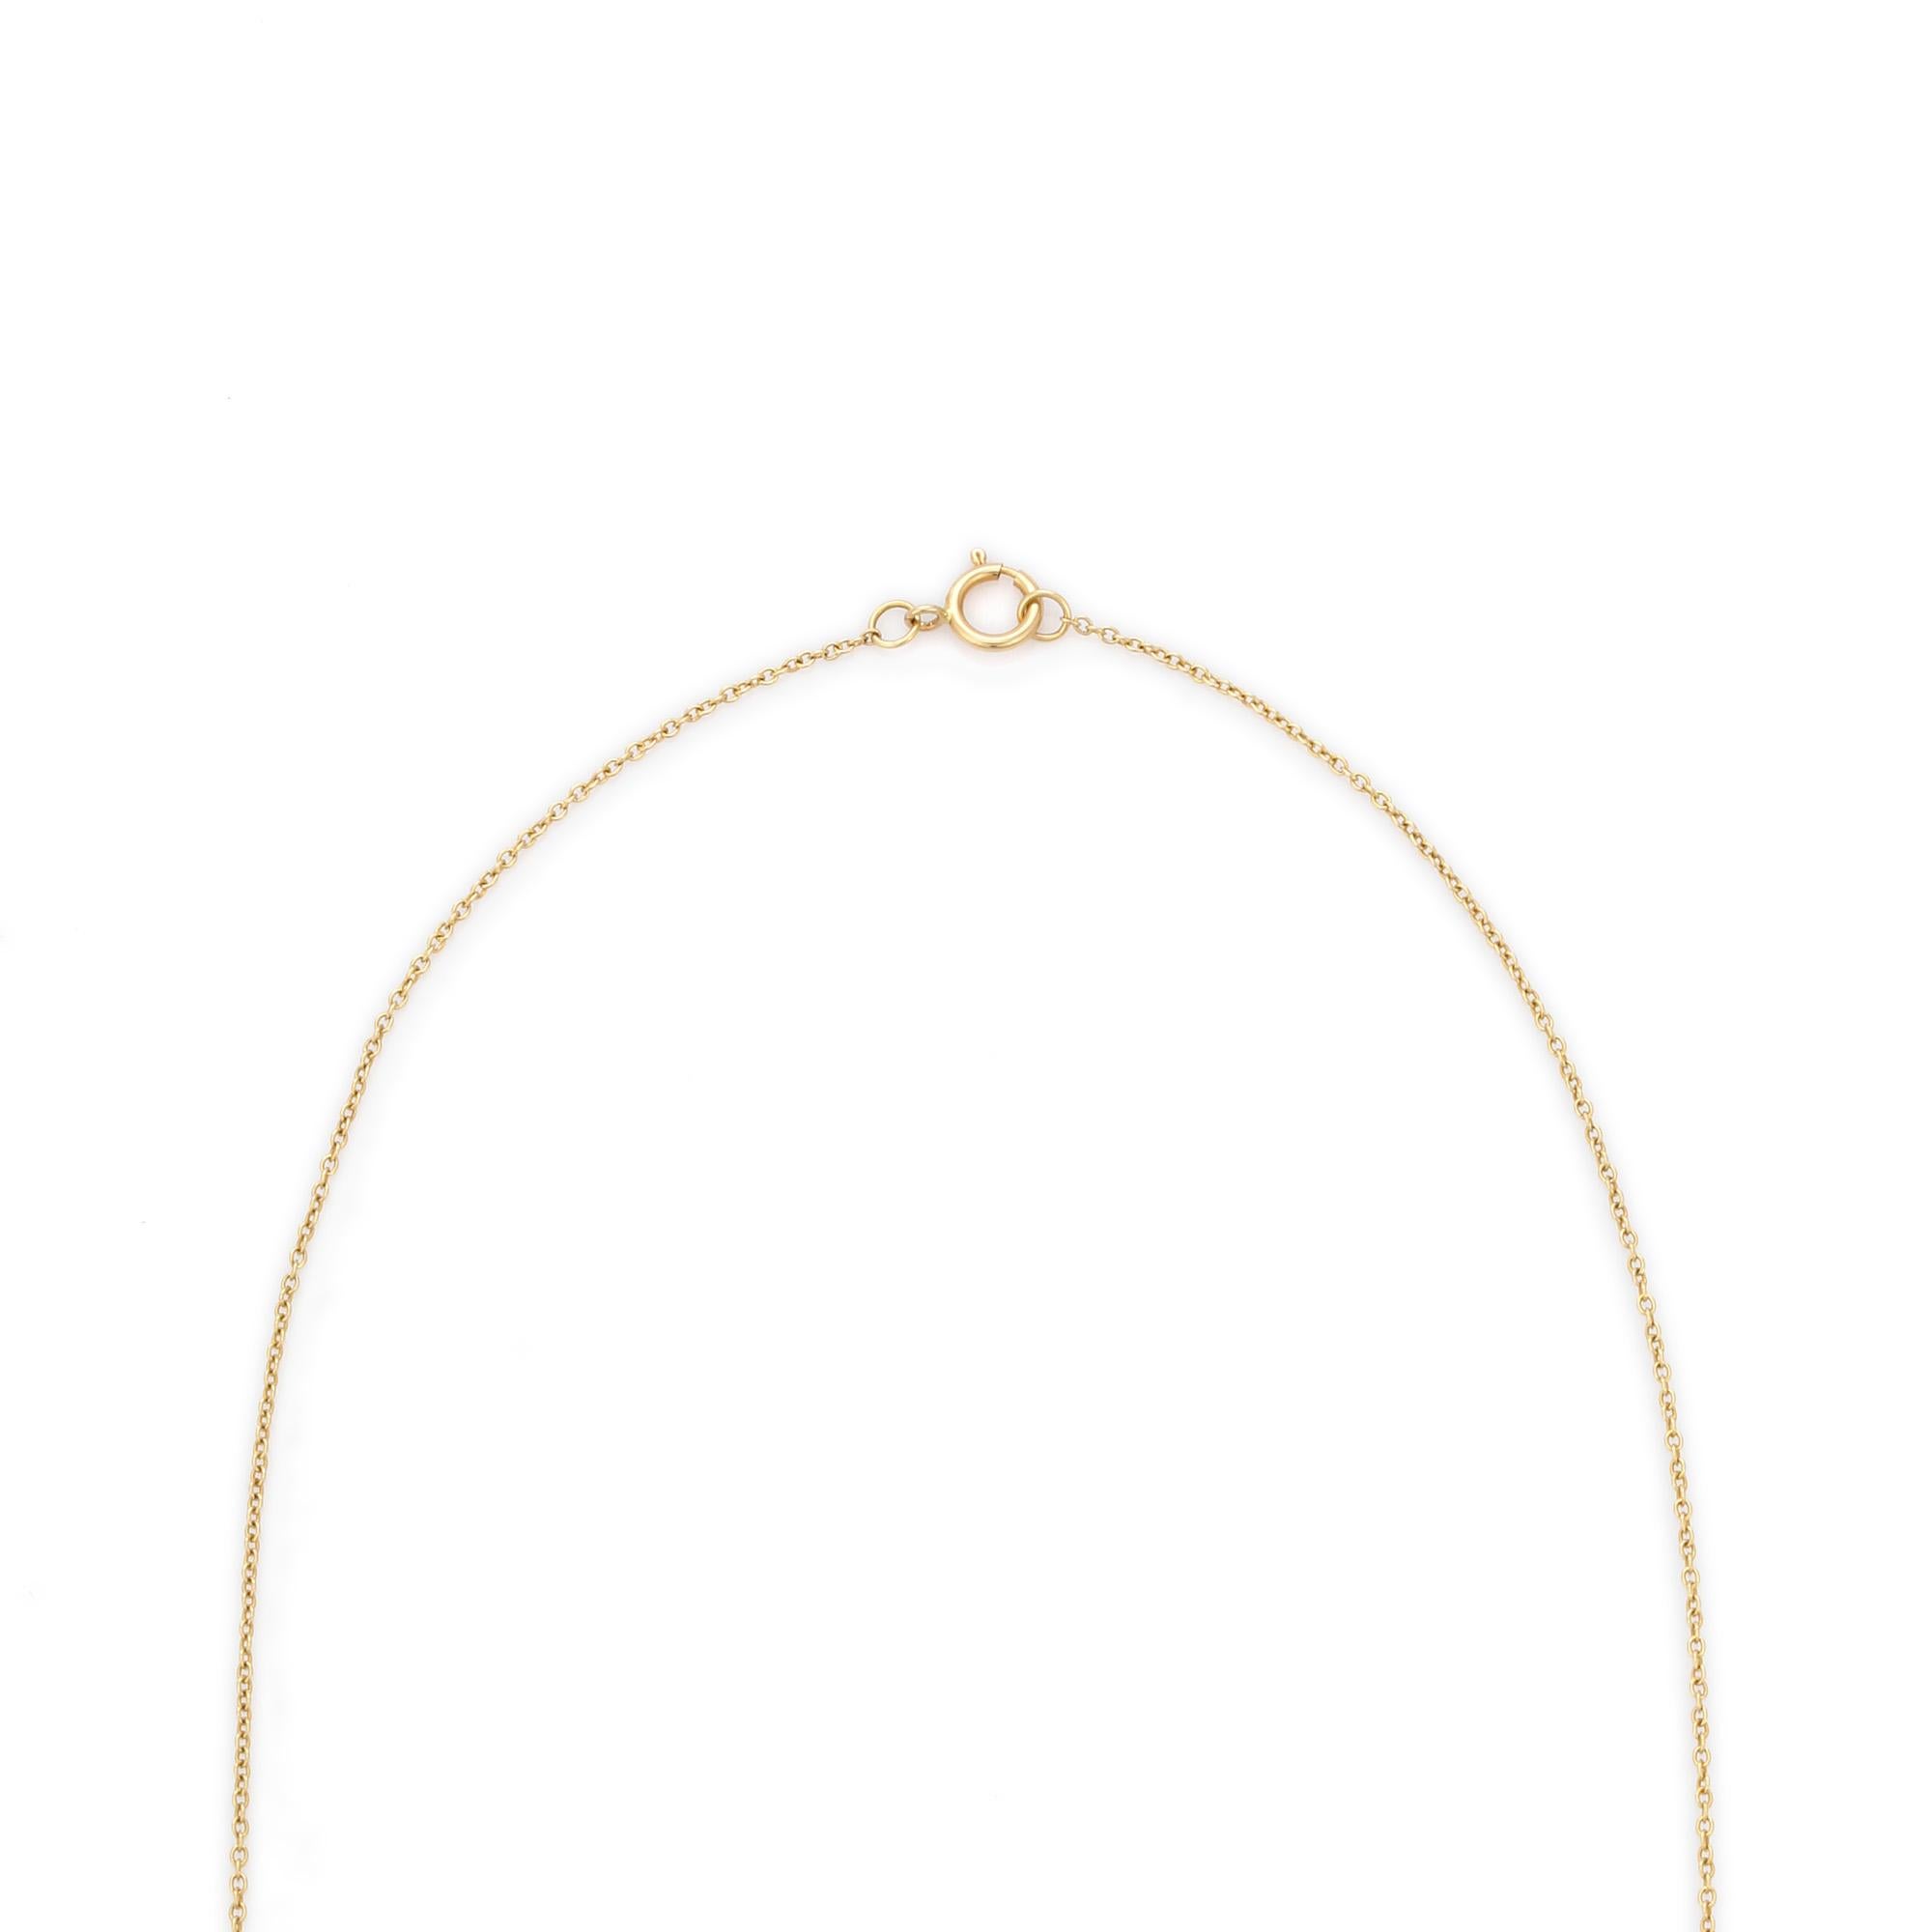 Oval Cut 16.7 Ct Opal Necklace in 18K Yellow Gold Chain For Sale